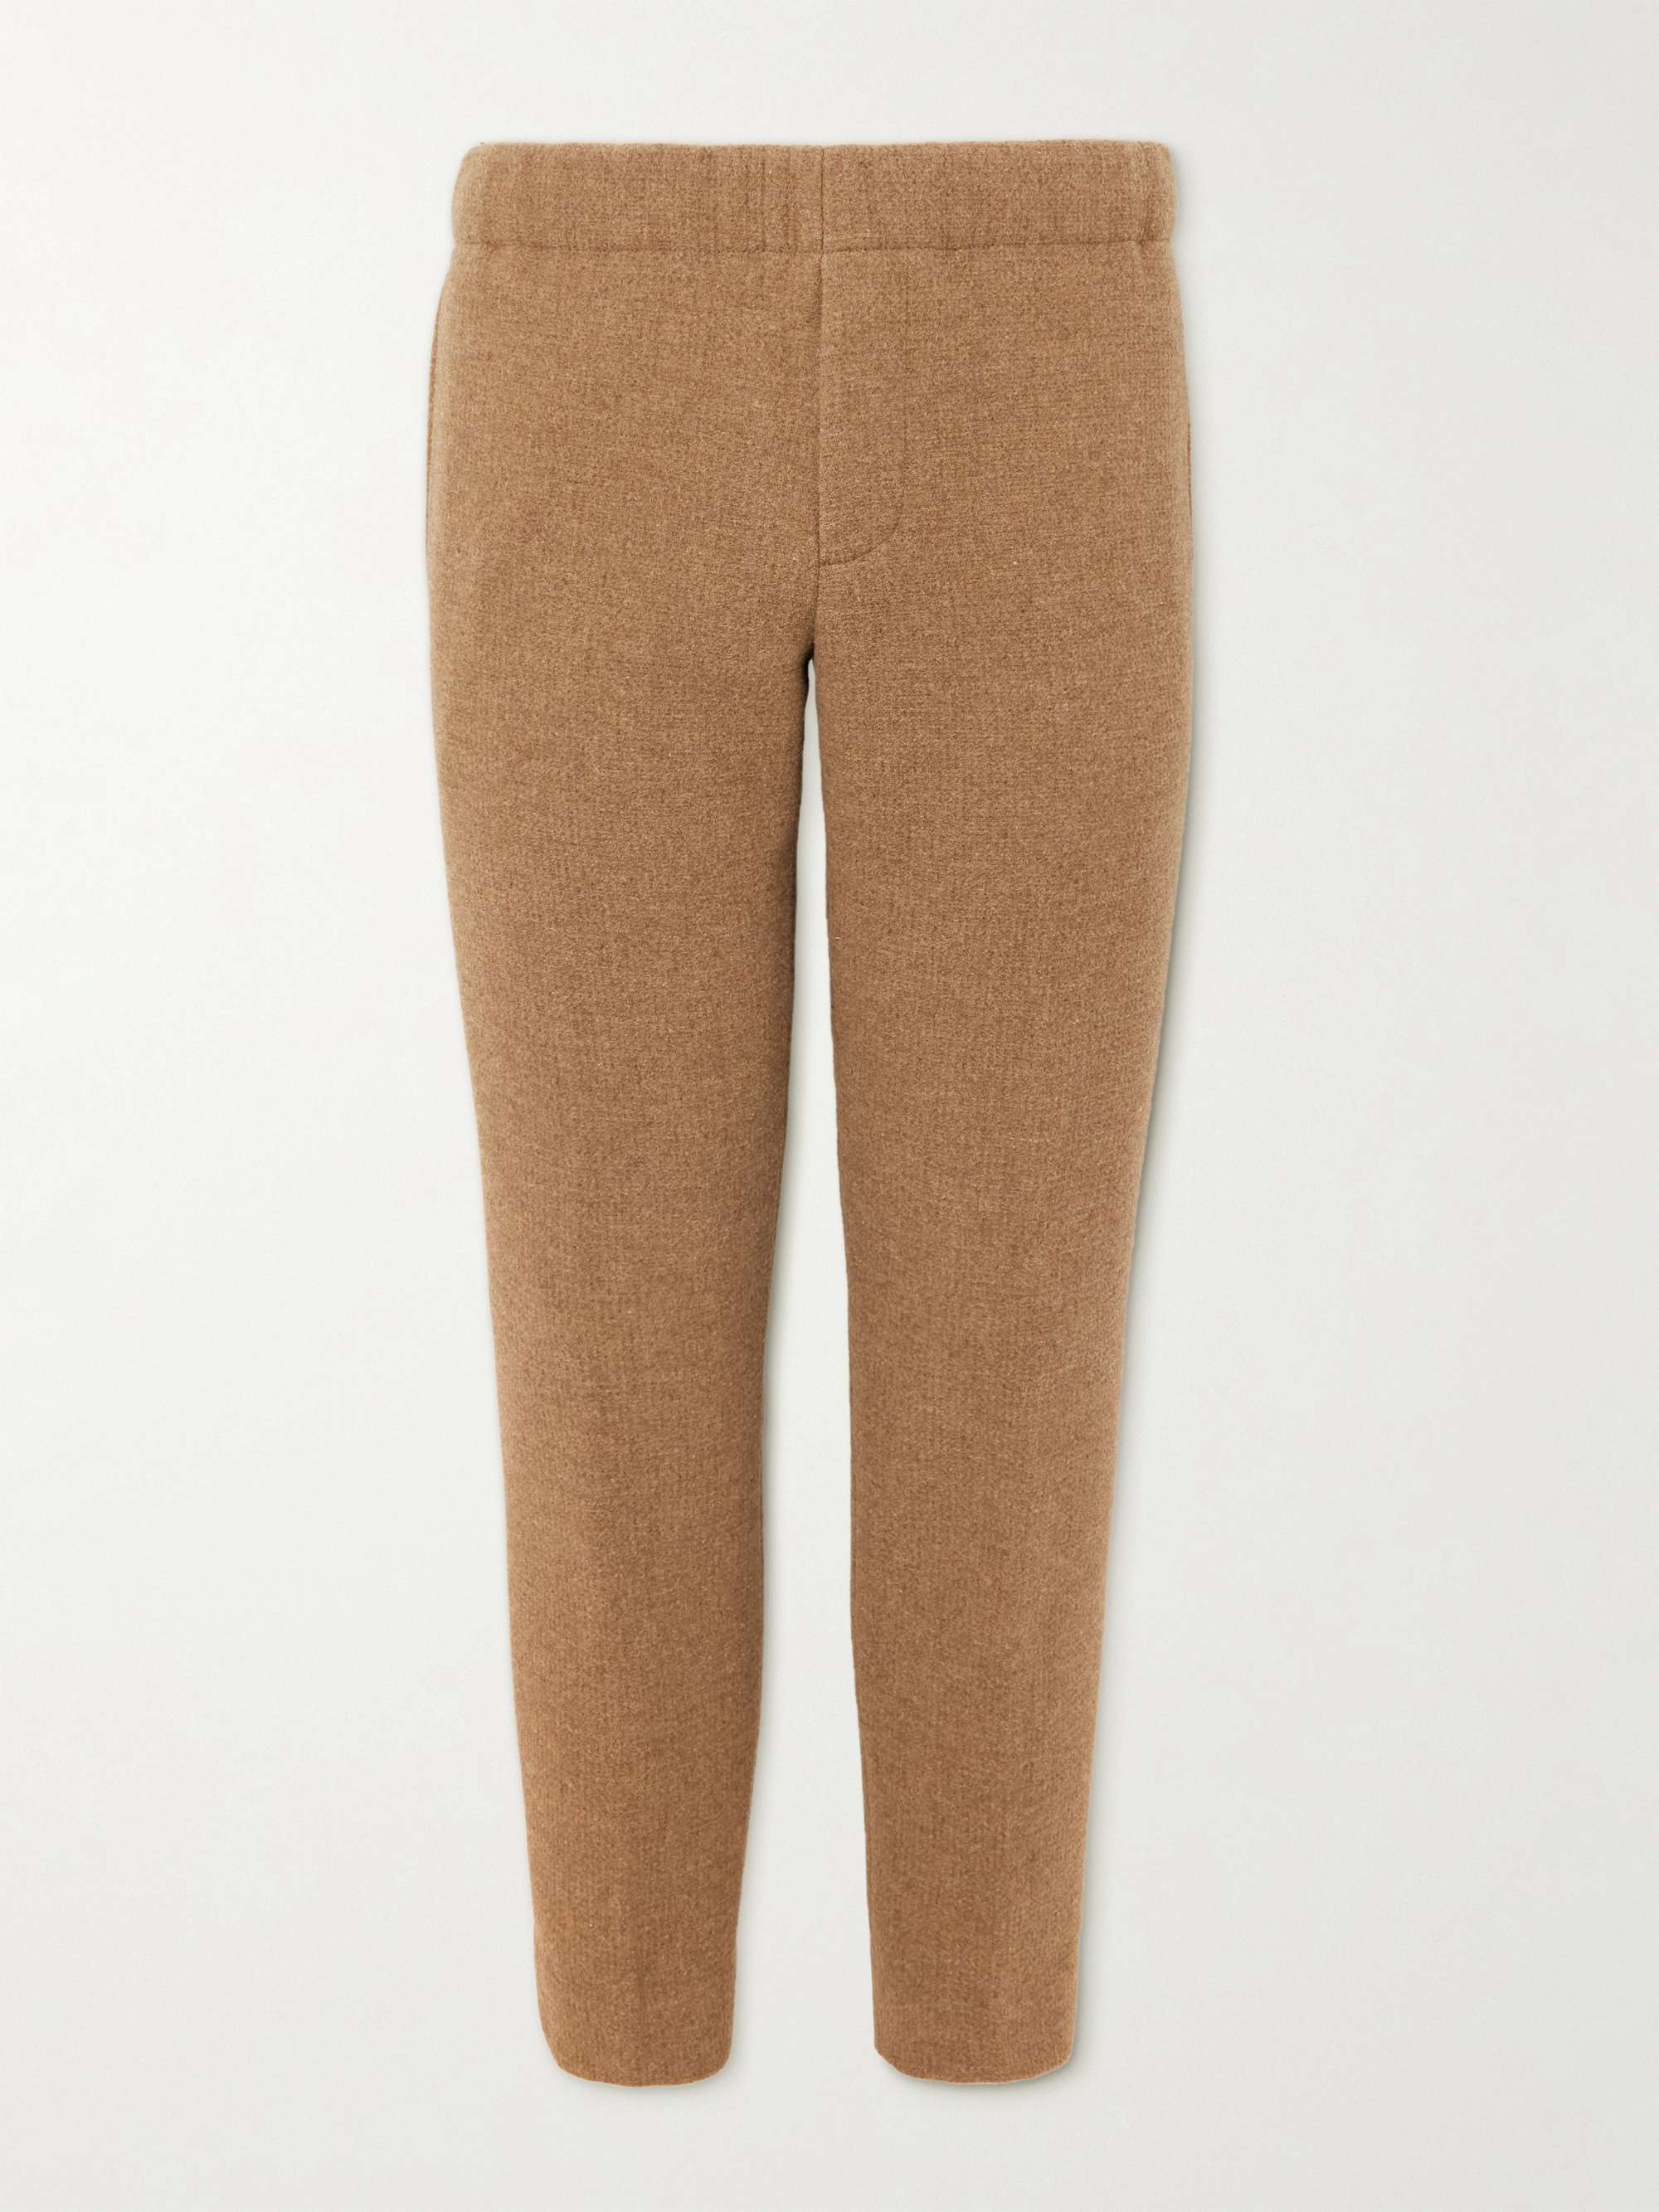 CLUB MONACO Tapered Cropped Wool-Blend Trousers